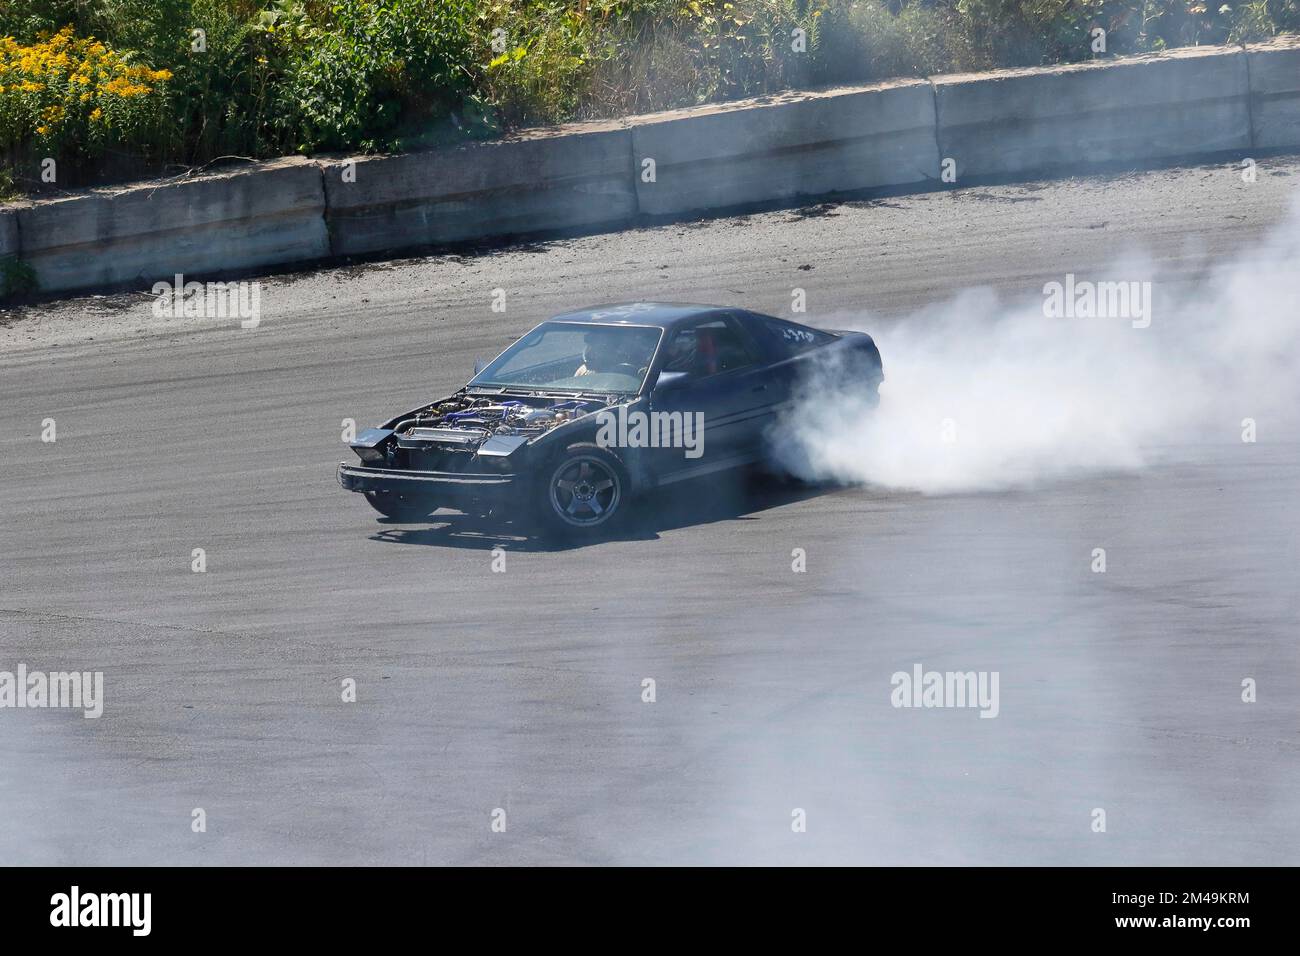 Car performing a skid test, Napierville, Province of Quebec, Canada Stock Photo